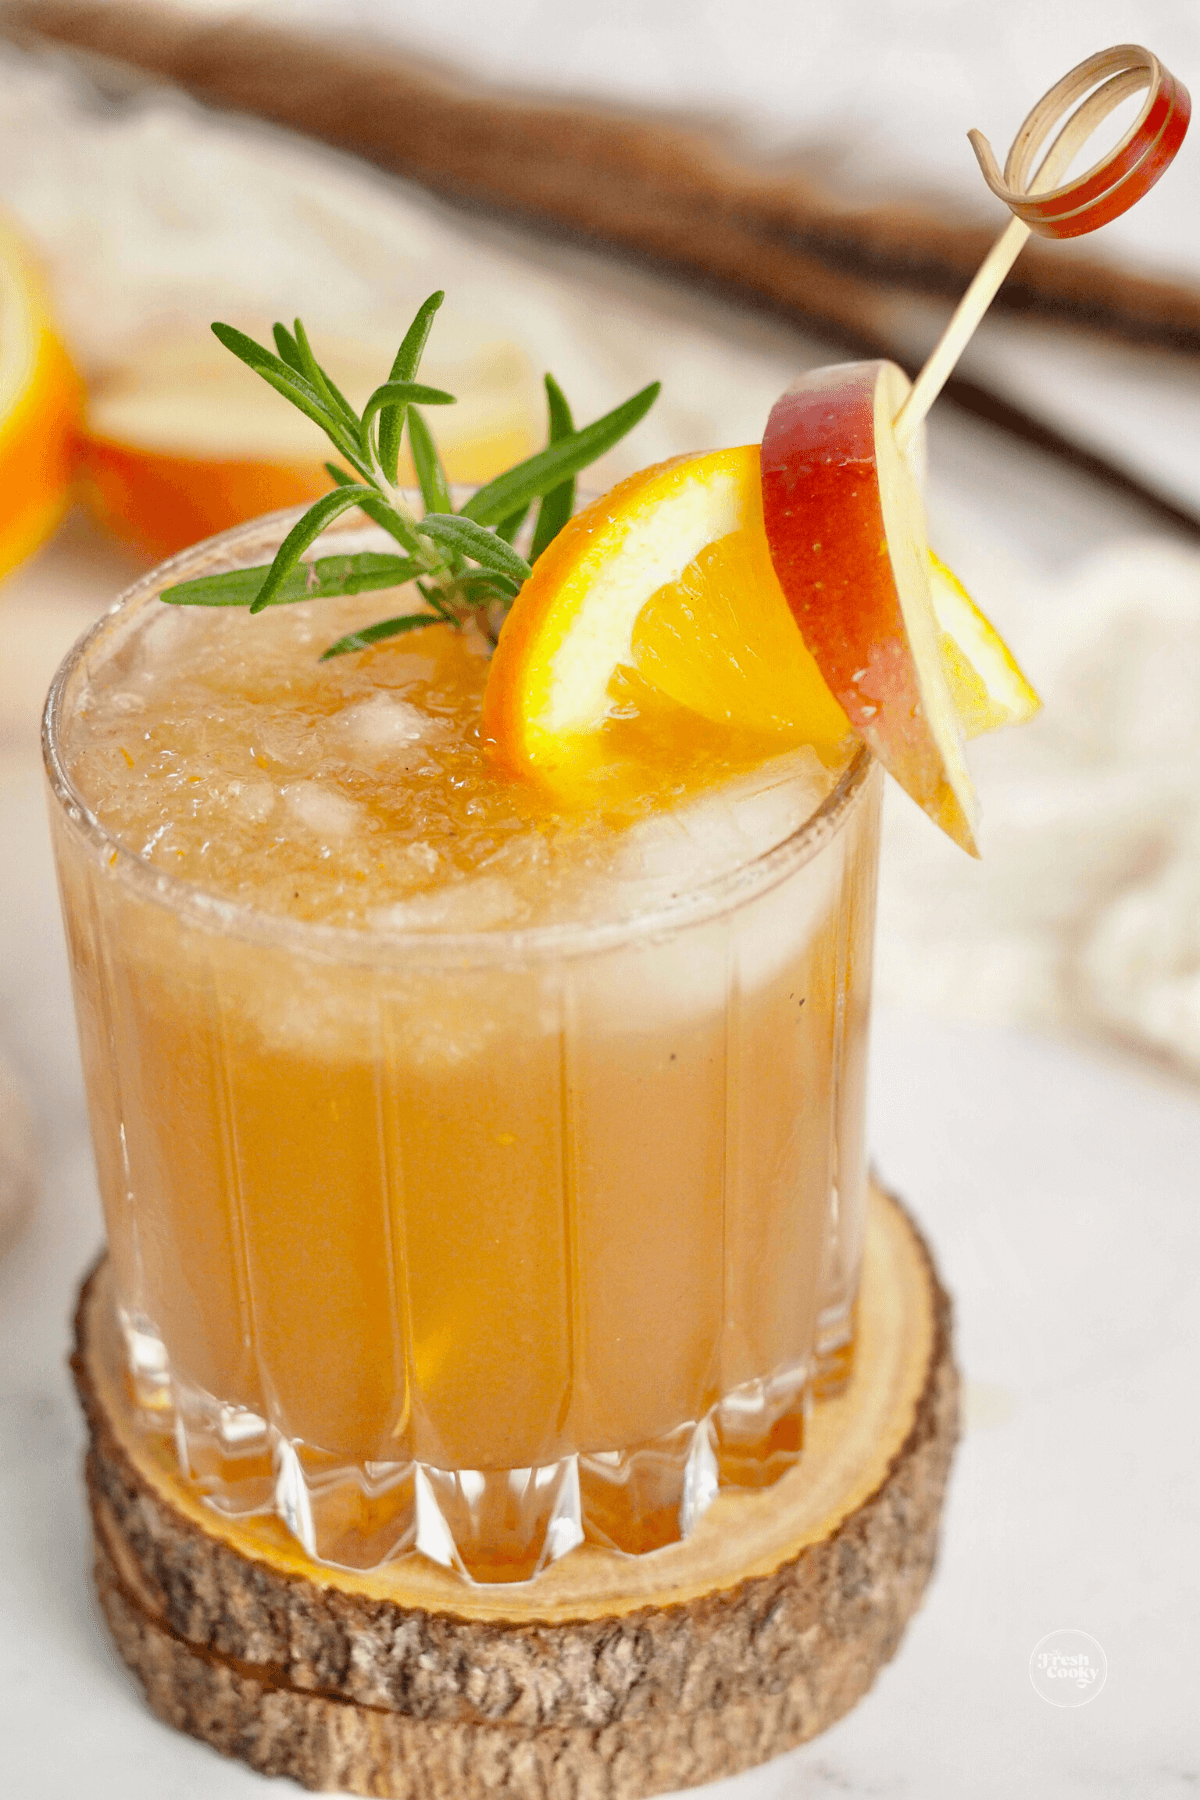 Apple cider bourbon smash in pretty cocktail glass with pick filled with apples, orange and a sprig of rosemary.